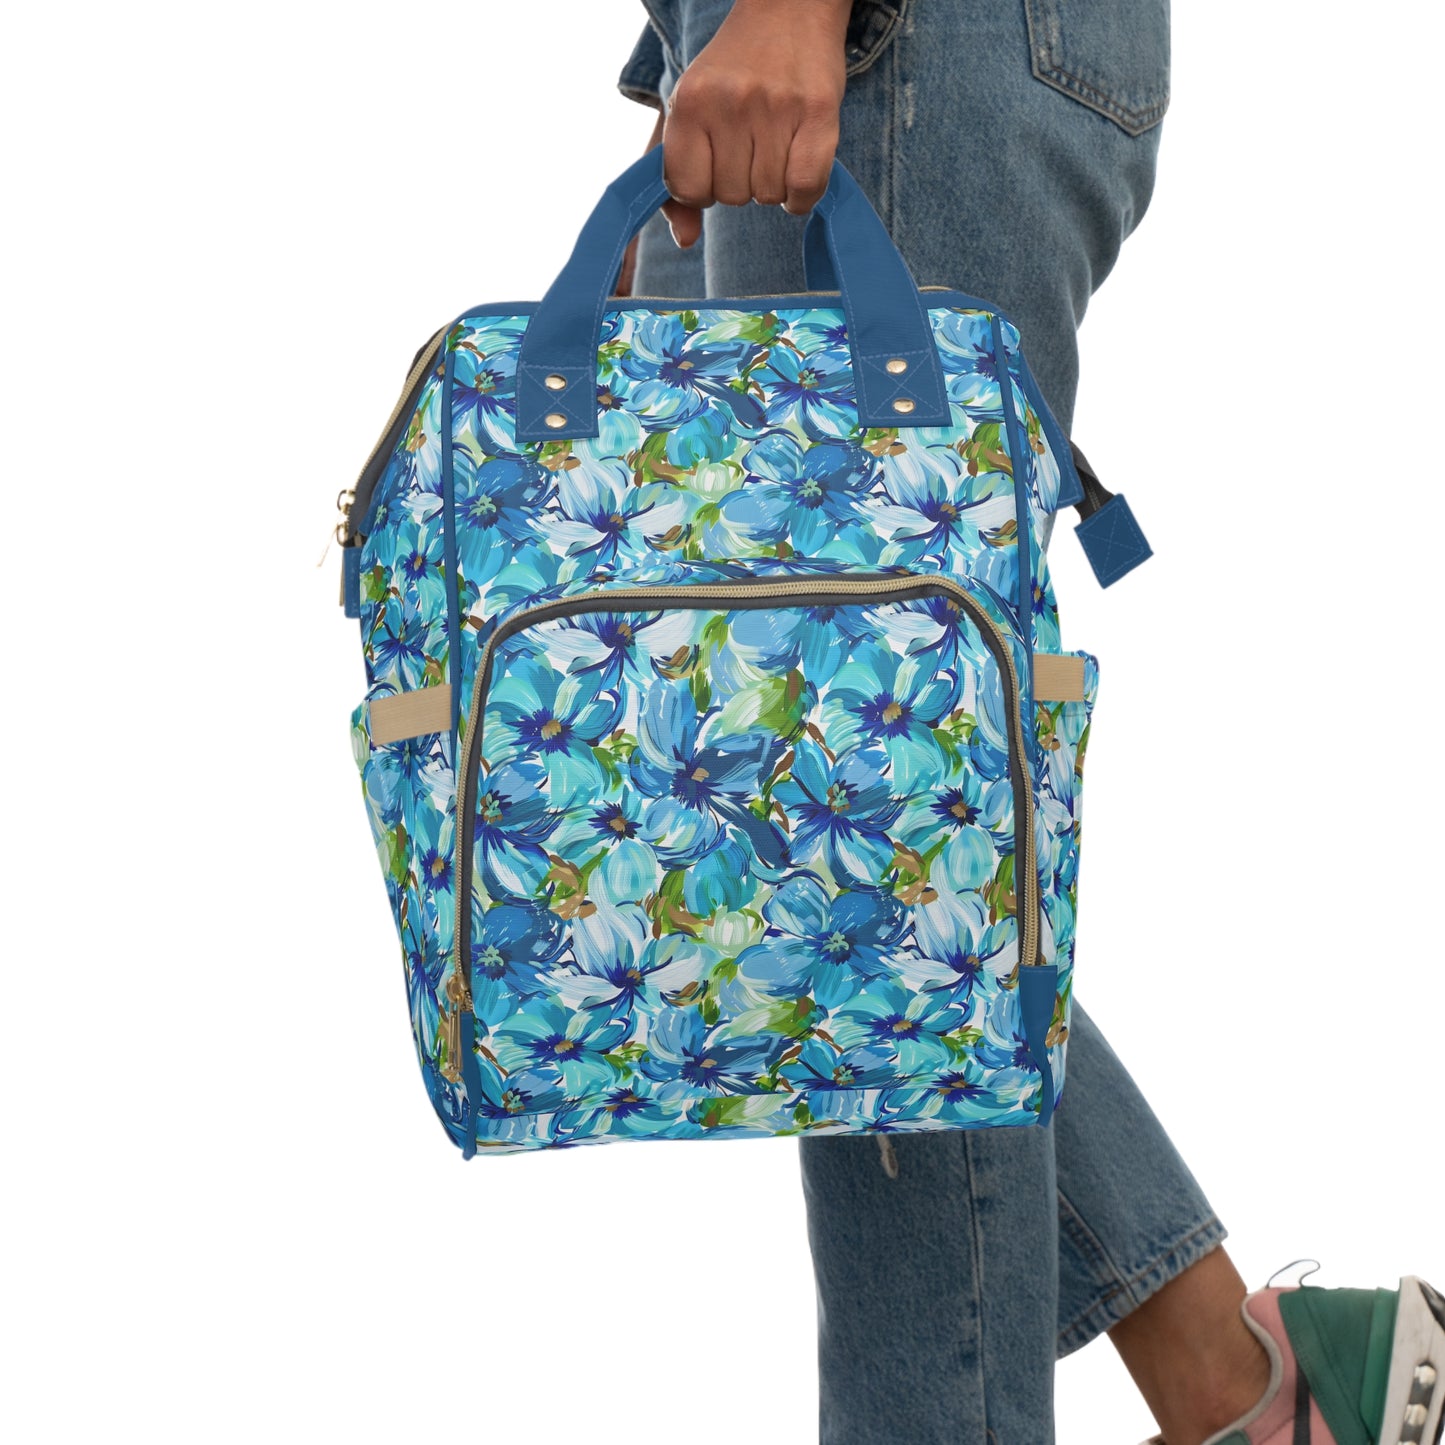 Large Blue Watercolor Flowers with Gentle Accents of Brown and Green Multifunctional Diaper Backpack